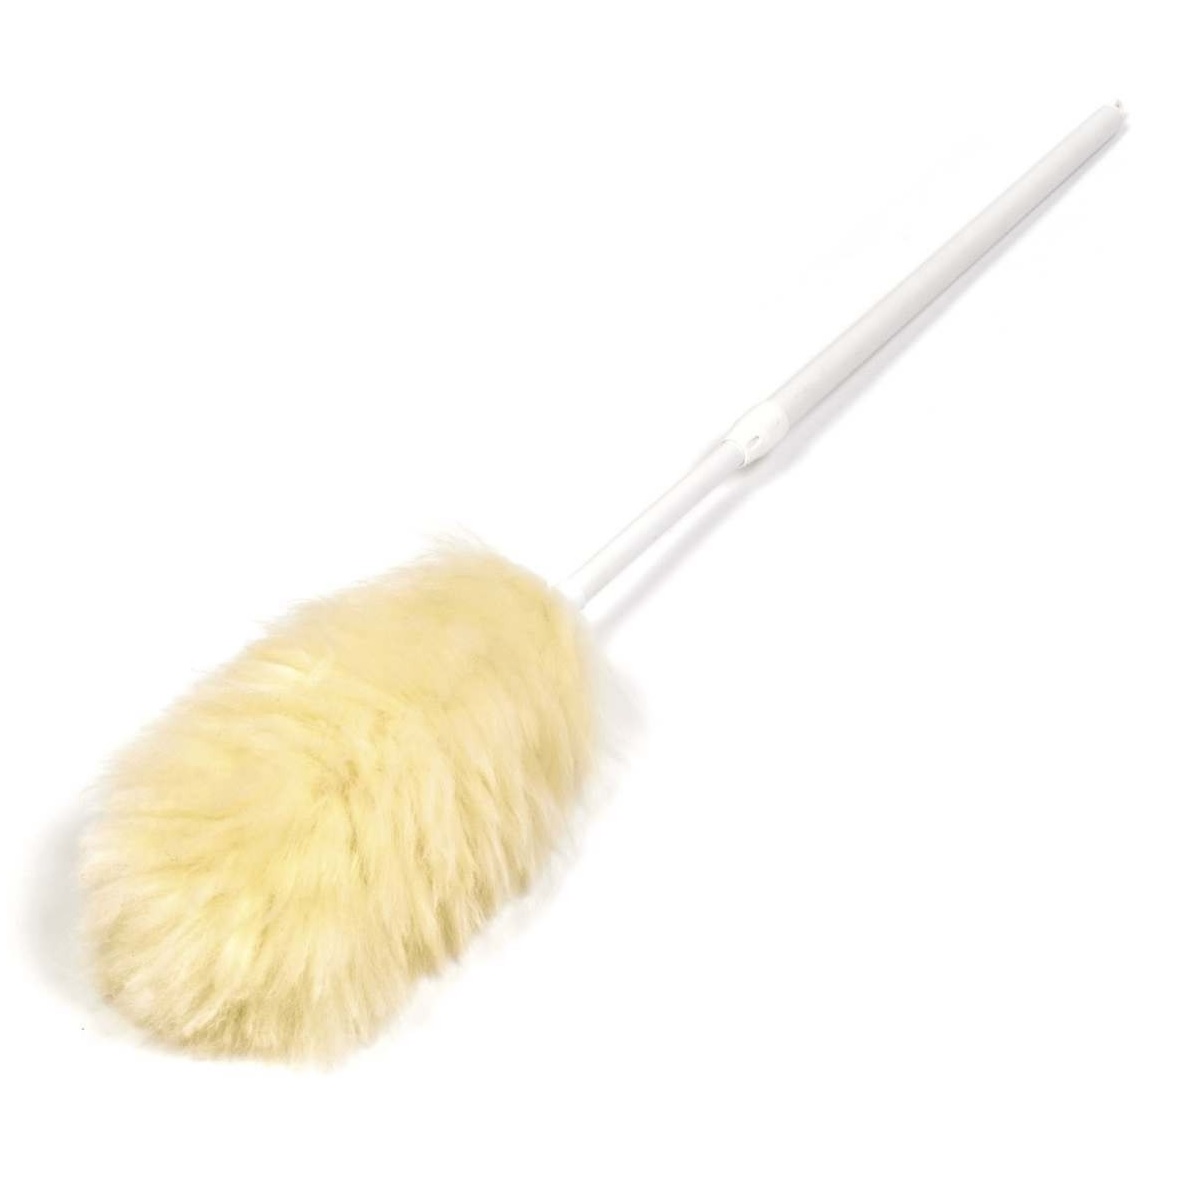 Telescopic Lambswool Duster - 2-section (Total Reach 42inch)